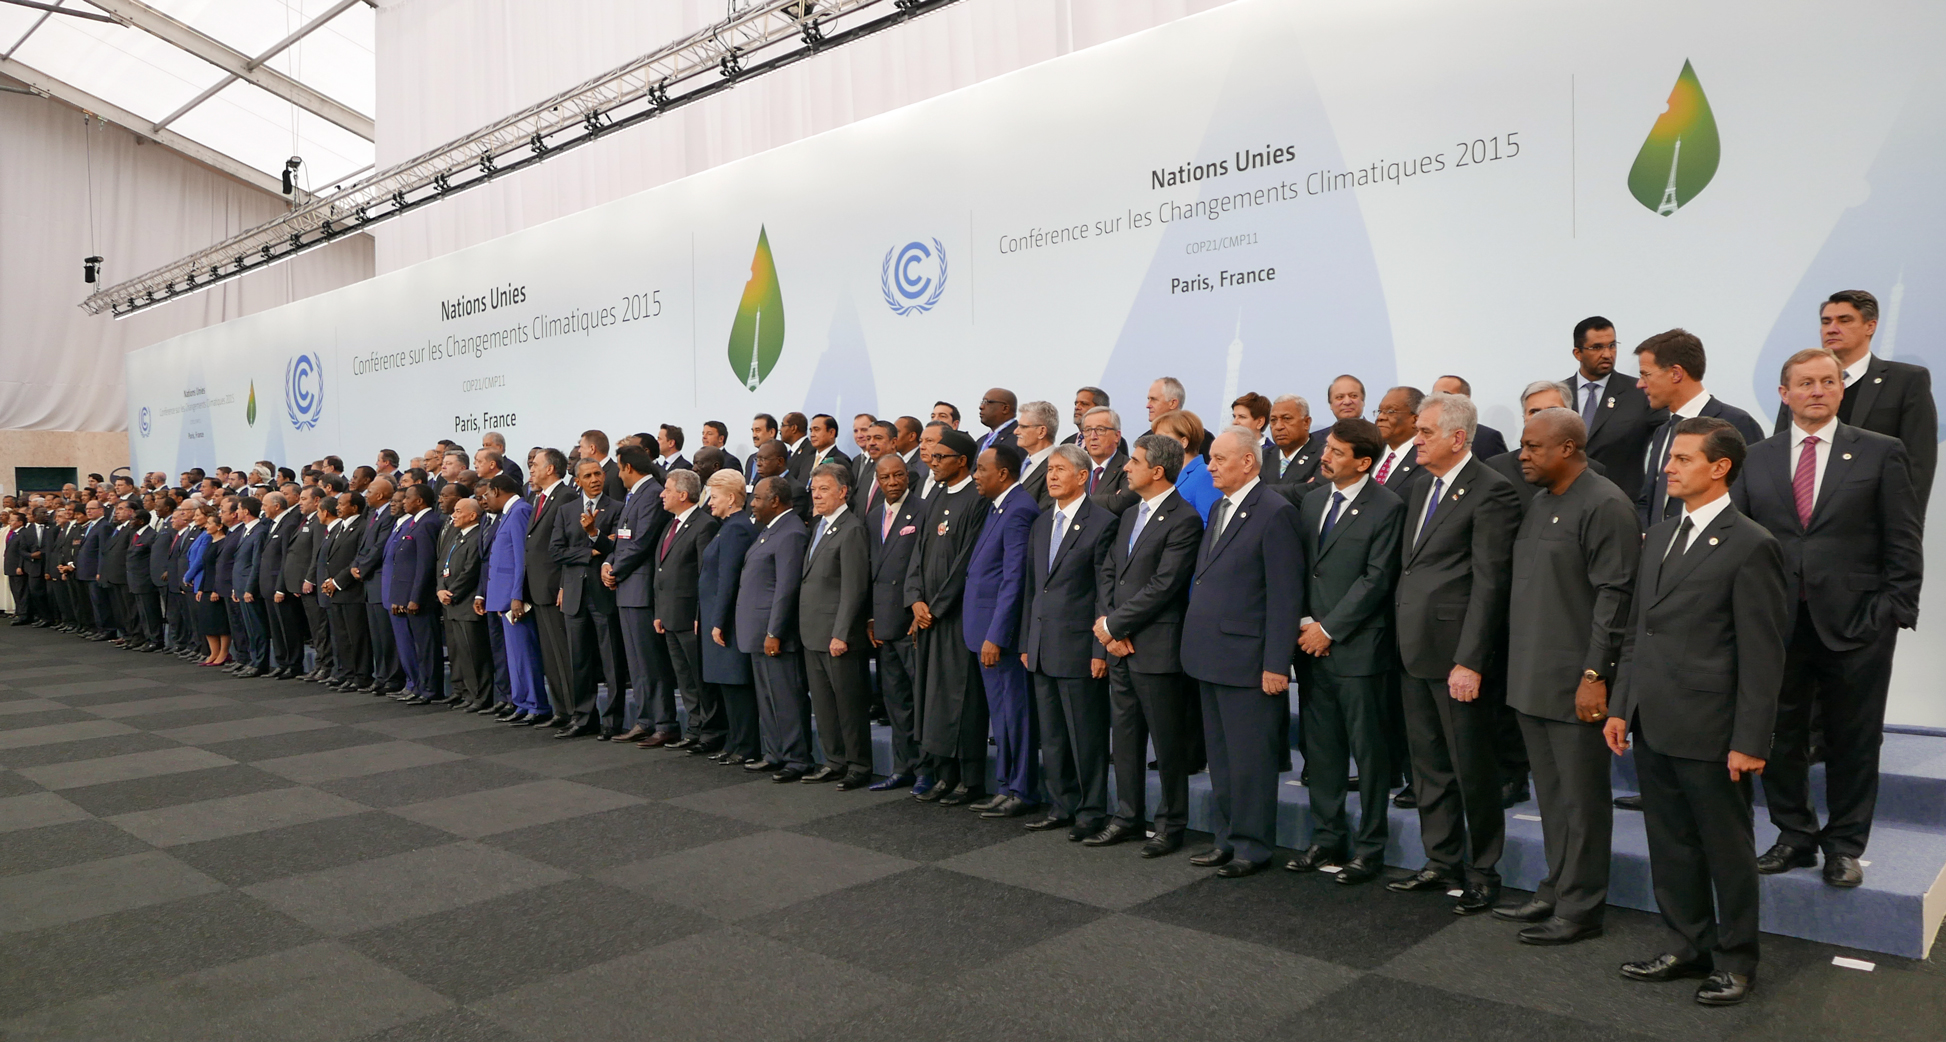 Nearly 150 countries under the United Nations framework convention will show up in New York to sign the agreement on climate change